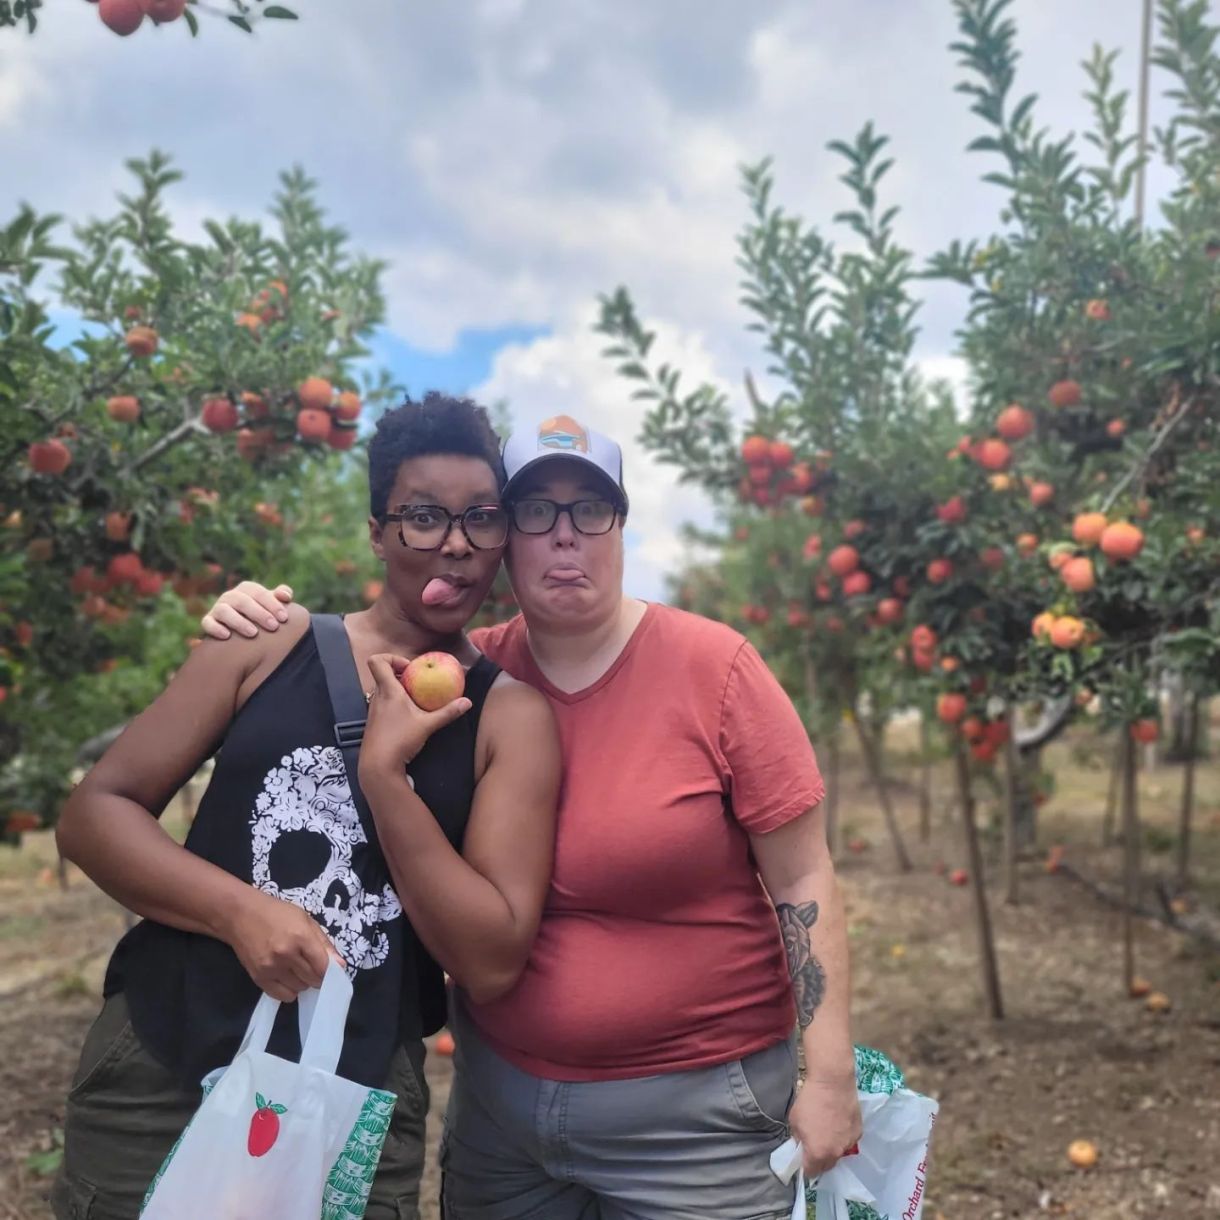 sai and her fiancee beth stand in an apple orchard and make funny faces while sai holds an apple. sa'iyda is a black woman with short hair and glasses wearing a skull tank top. beth is a white woman wearing a trucker hat, glasses and salmon tee shirt